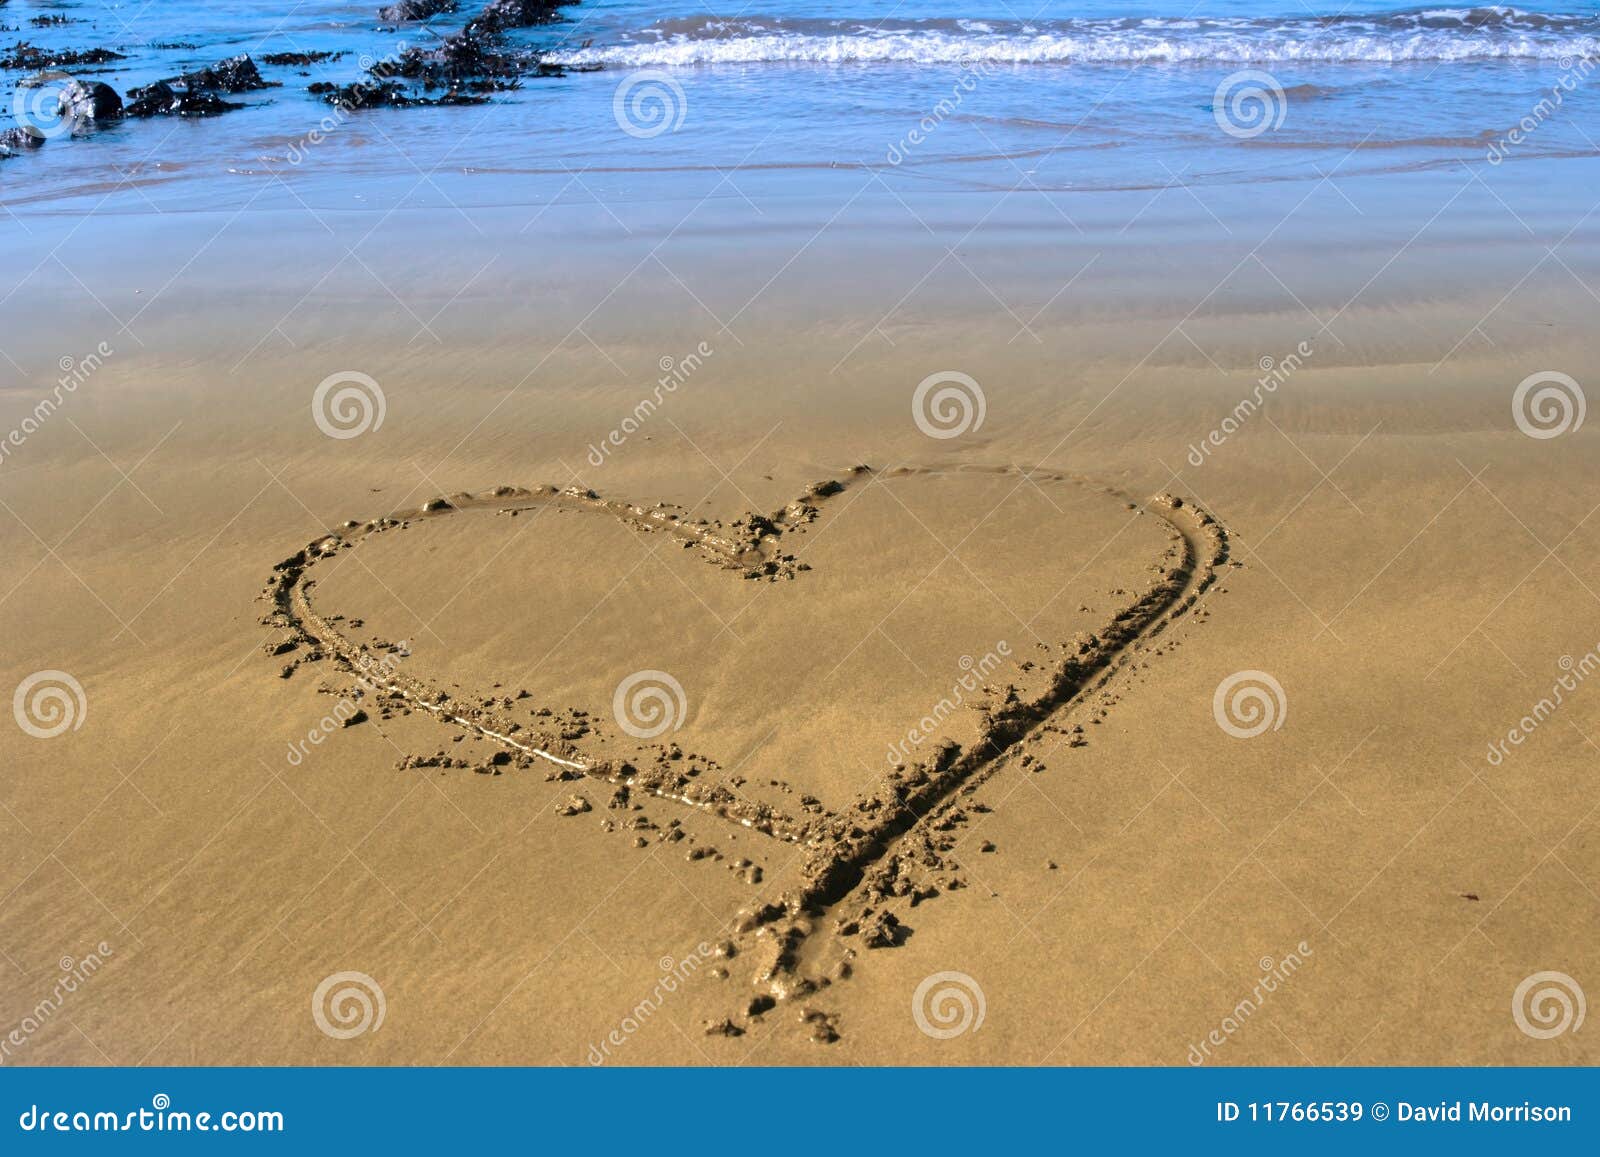 Beach love heart stock image. Image of drawn, message - 11766539